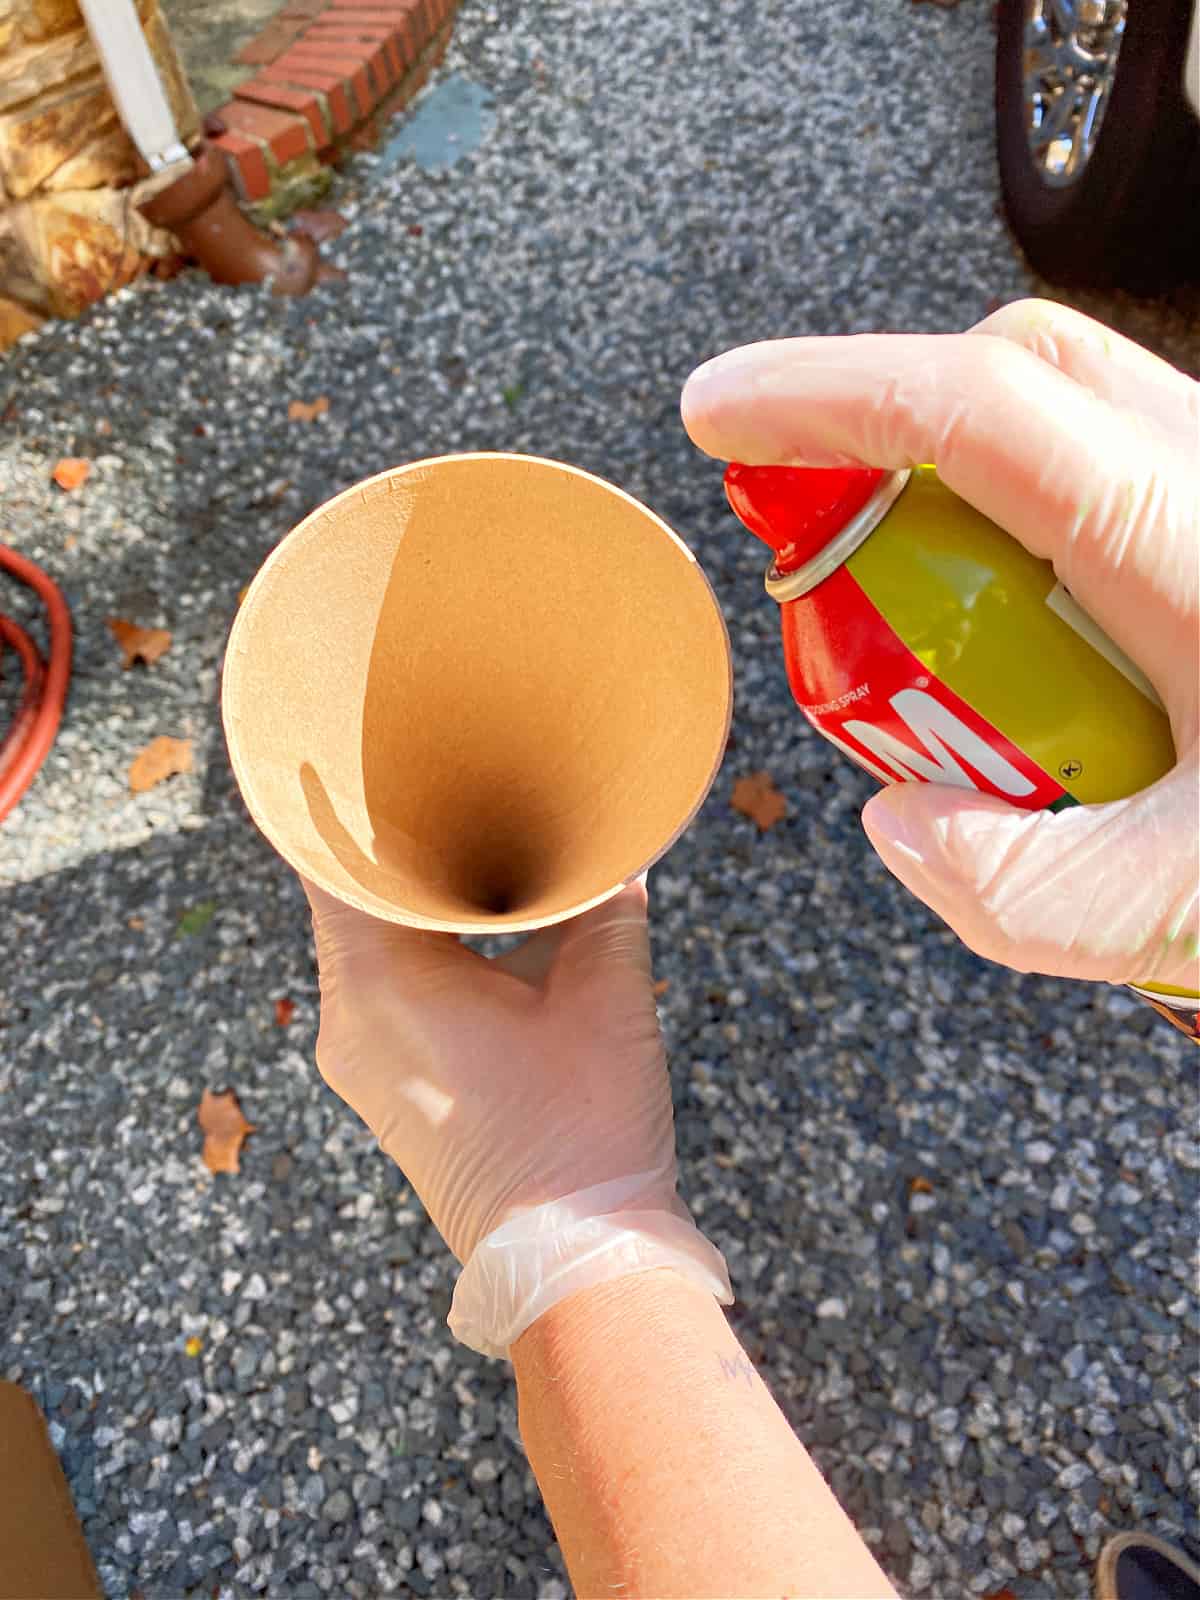 spraying cooking spray in a cardboard cone form